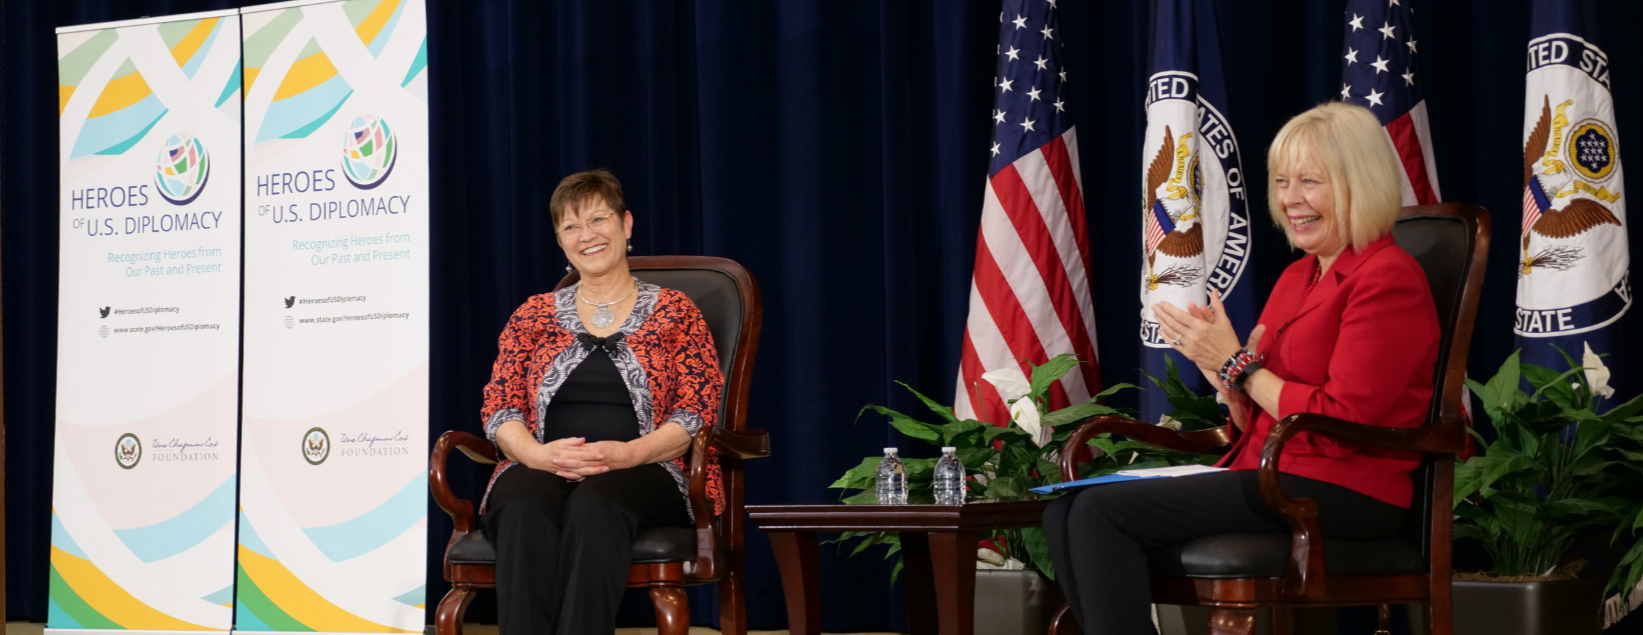 Elizabeth Slater and Director General Carol Perez sit in armchairs on the stage for the launch of the Heroes of U.S. Diplomacy initiative.